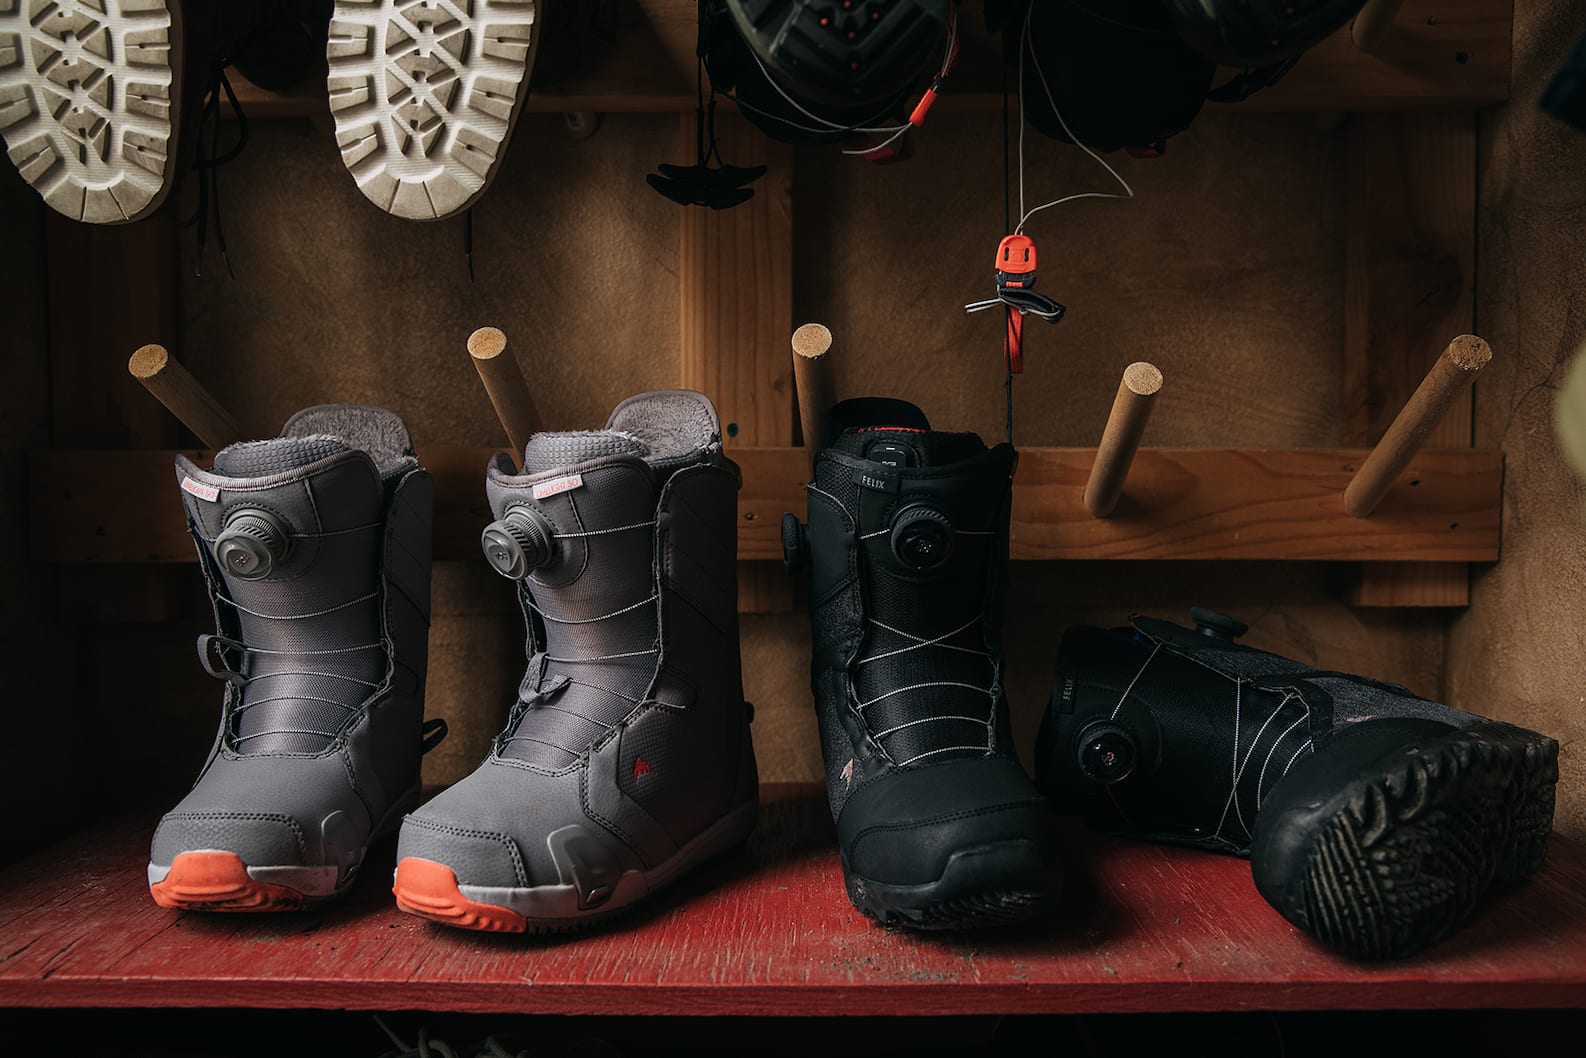 Burton's Official Snowboard Boot Sizing & Buyer's Guide | Burton Snowboards